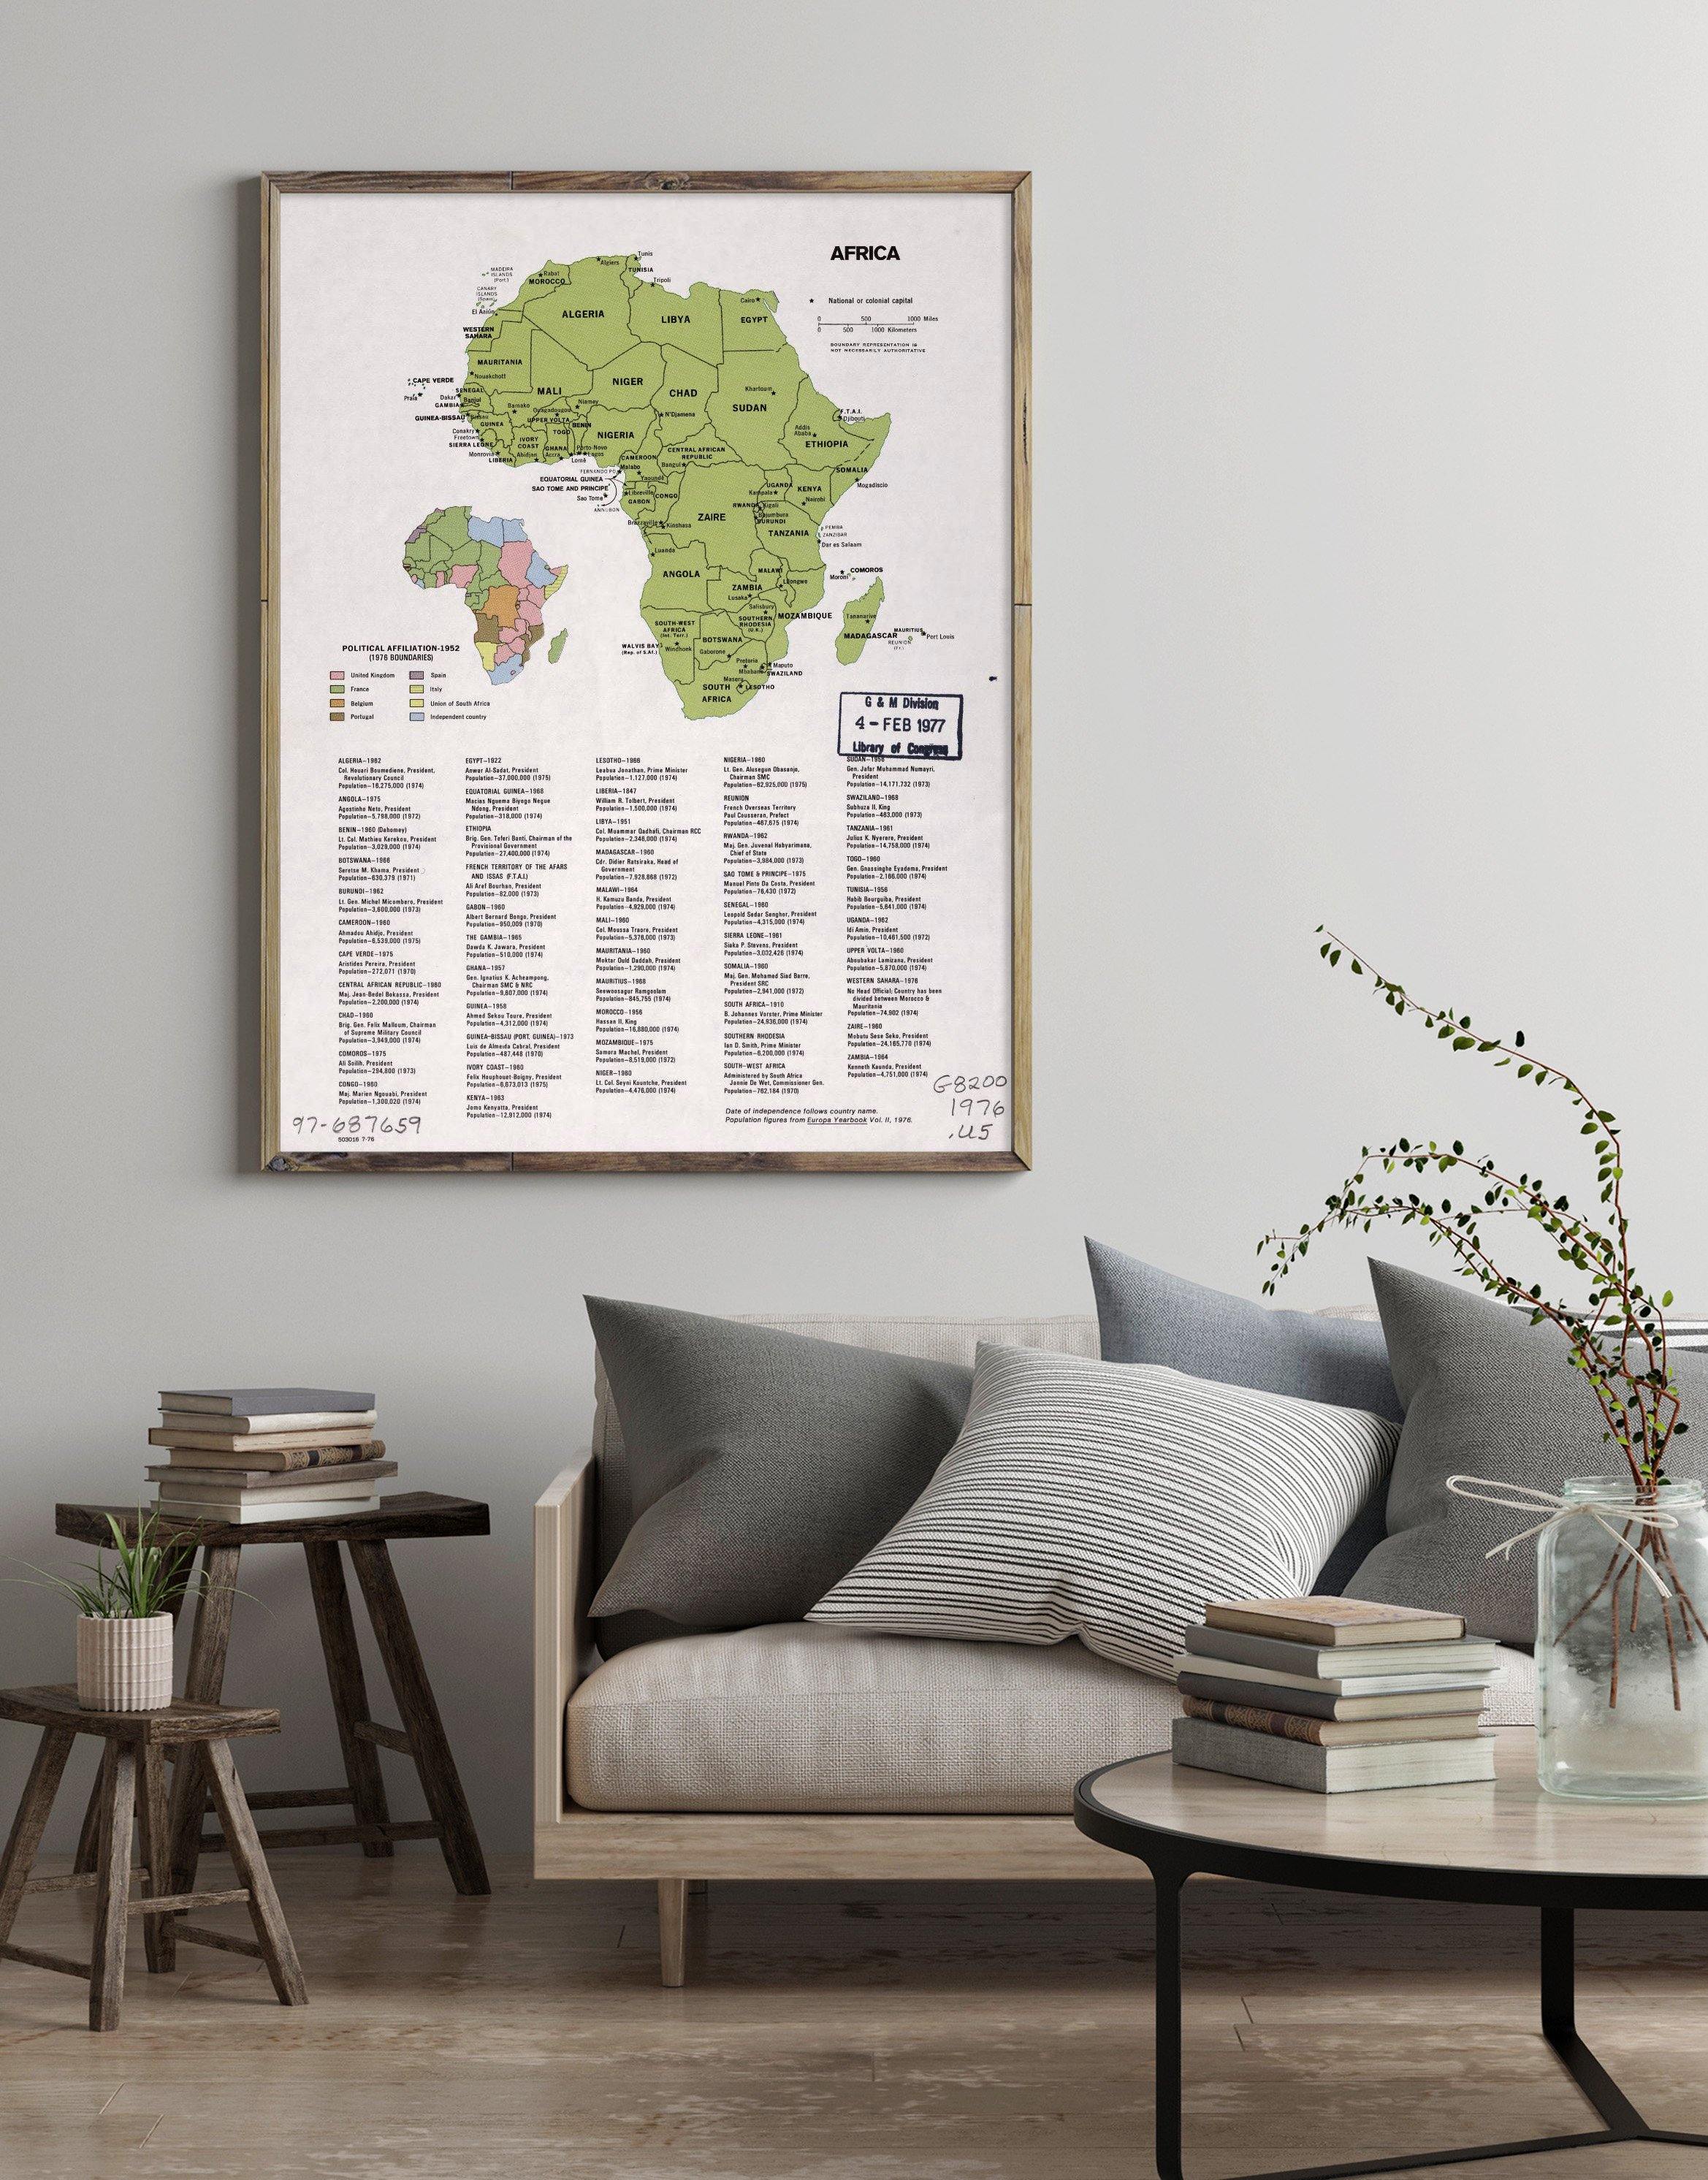 1976 Map| Africa| Africa Map Size: 18 inches x 24 inches |Fits 18x24 s - New York Map Company